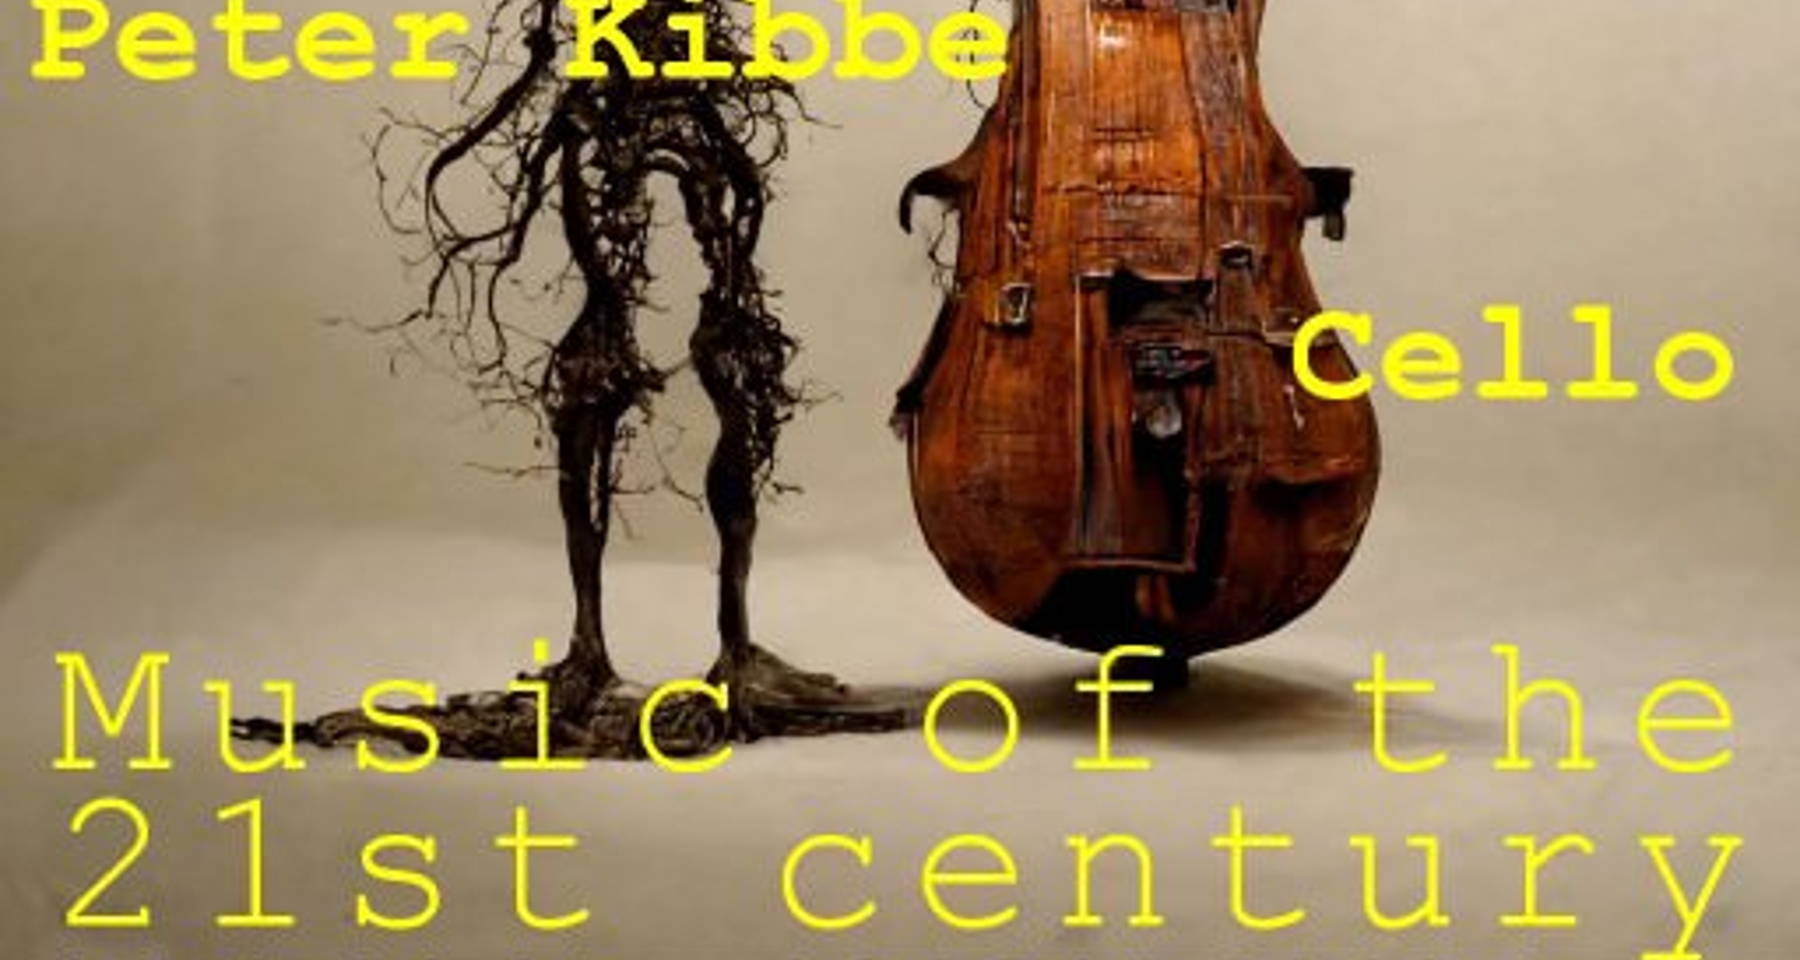 Music of the 21st Century with Cellist Peter Kibbe